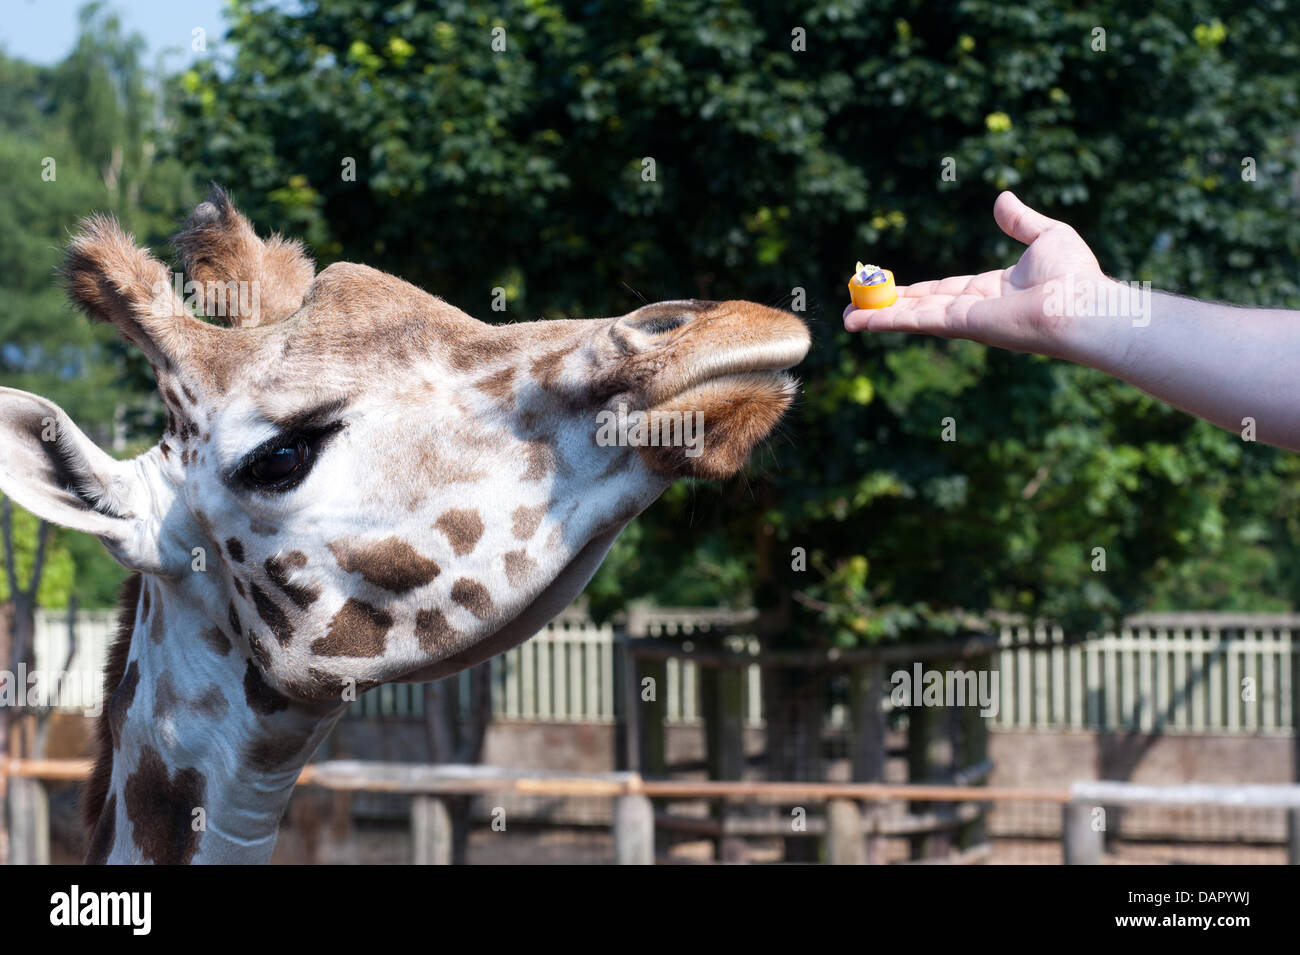 London, UK - 17 July 2013: Giraffes at ZSL London Zoo experience silver service with a difference ahead of the opening of brand-new The Terrace Restaurant next Friday. Gary Devereaux, executive chef for the Zoo’s caterers Ampersand, servs up custom dishes to get the animals’ seal of approval before The Terrace Restaurant opens its doors to Zoo visitors. Credit:  Piero Cruciatti/Alamy Live News Stock Photo